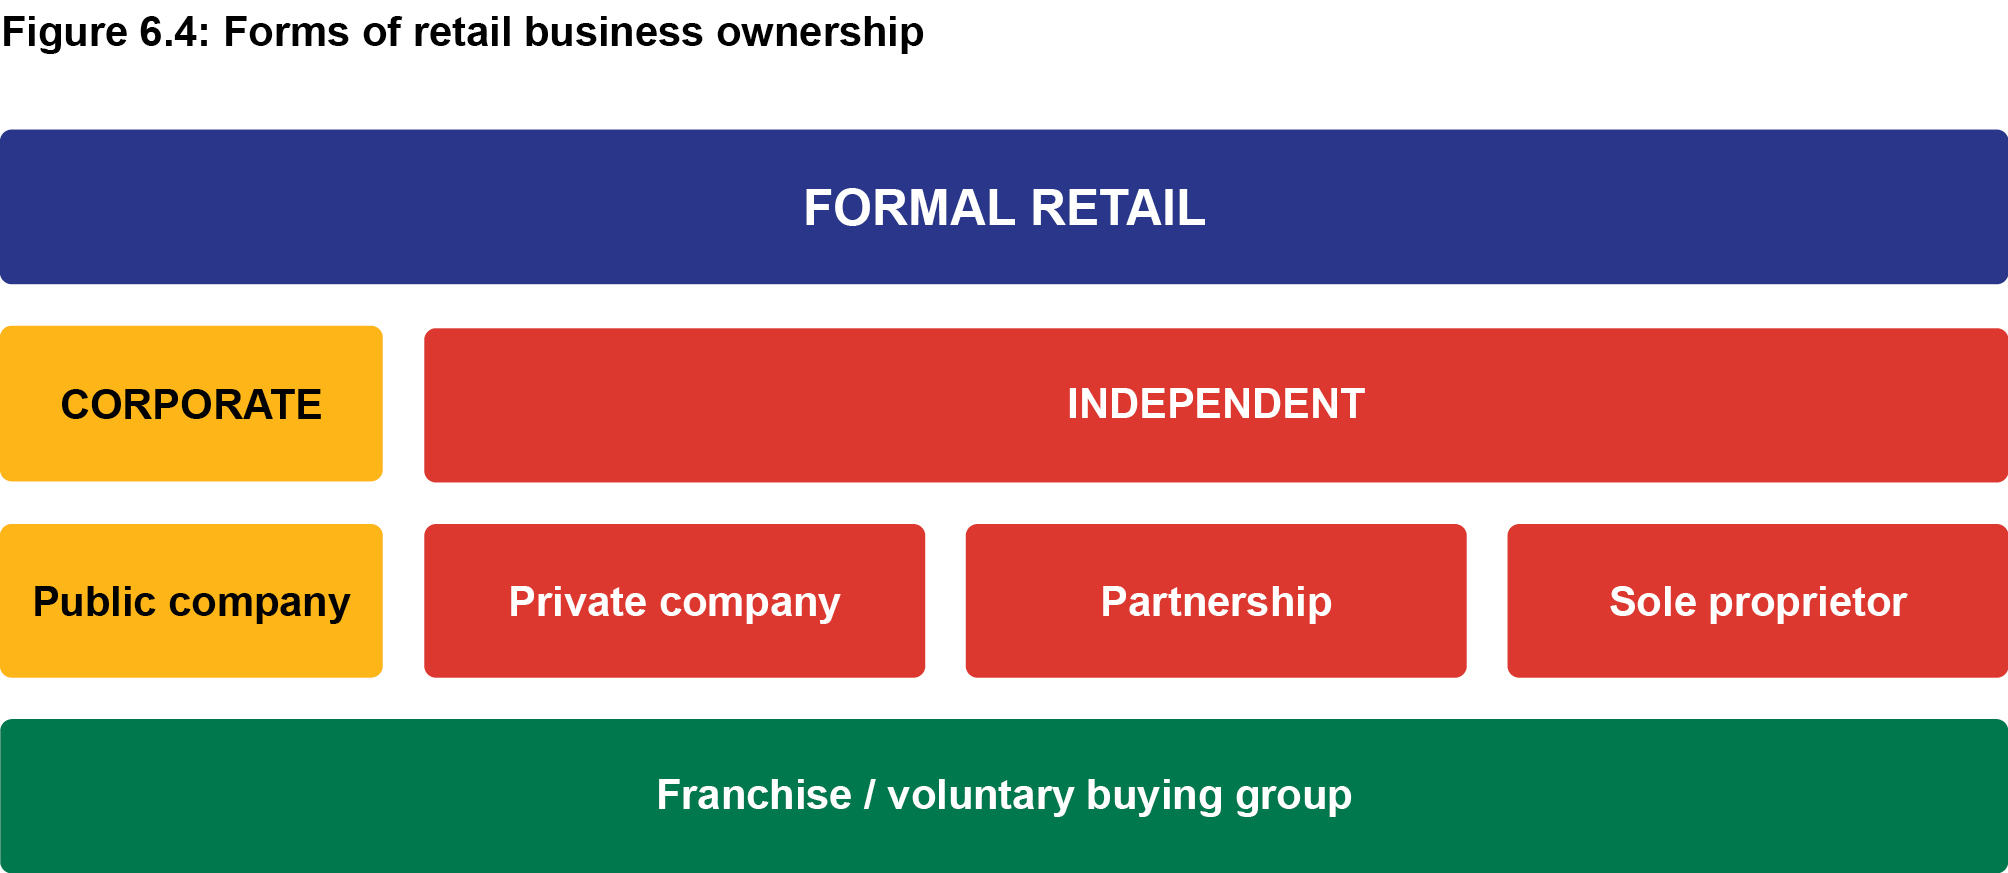 Figure 6.4: Forms of retail business ownership